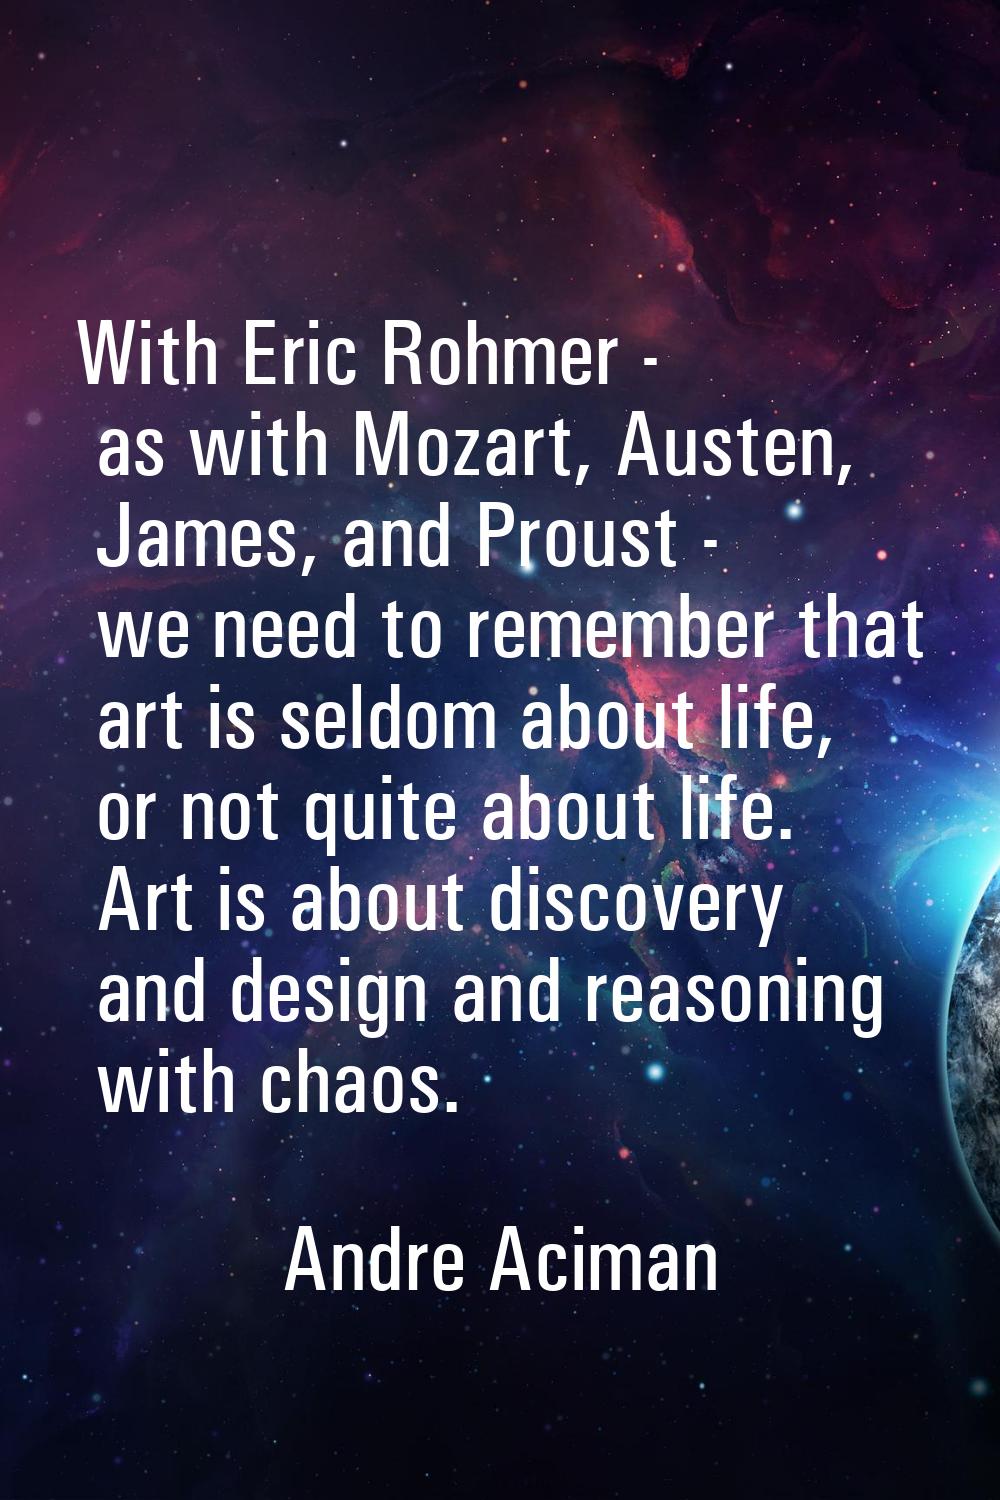 With Eric Rohmer - as with Mozart, Austen, James, and Proust - we need to remember that art is seld